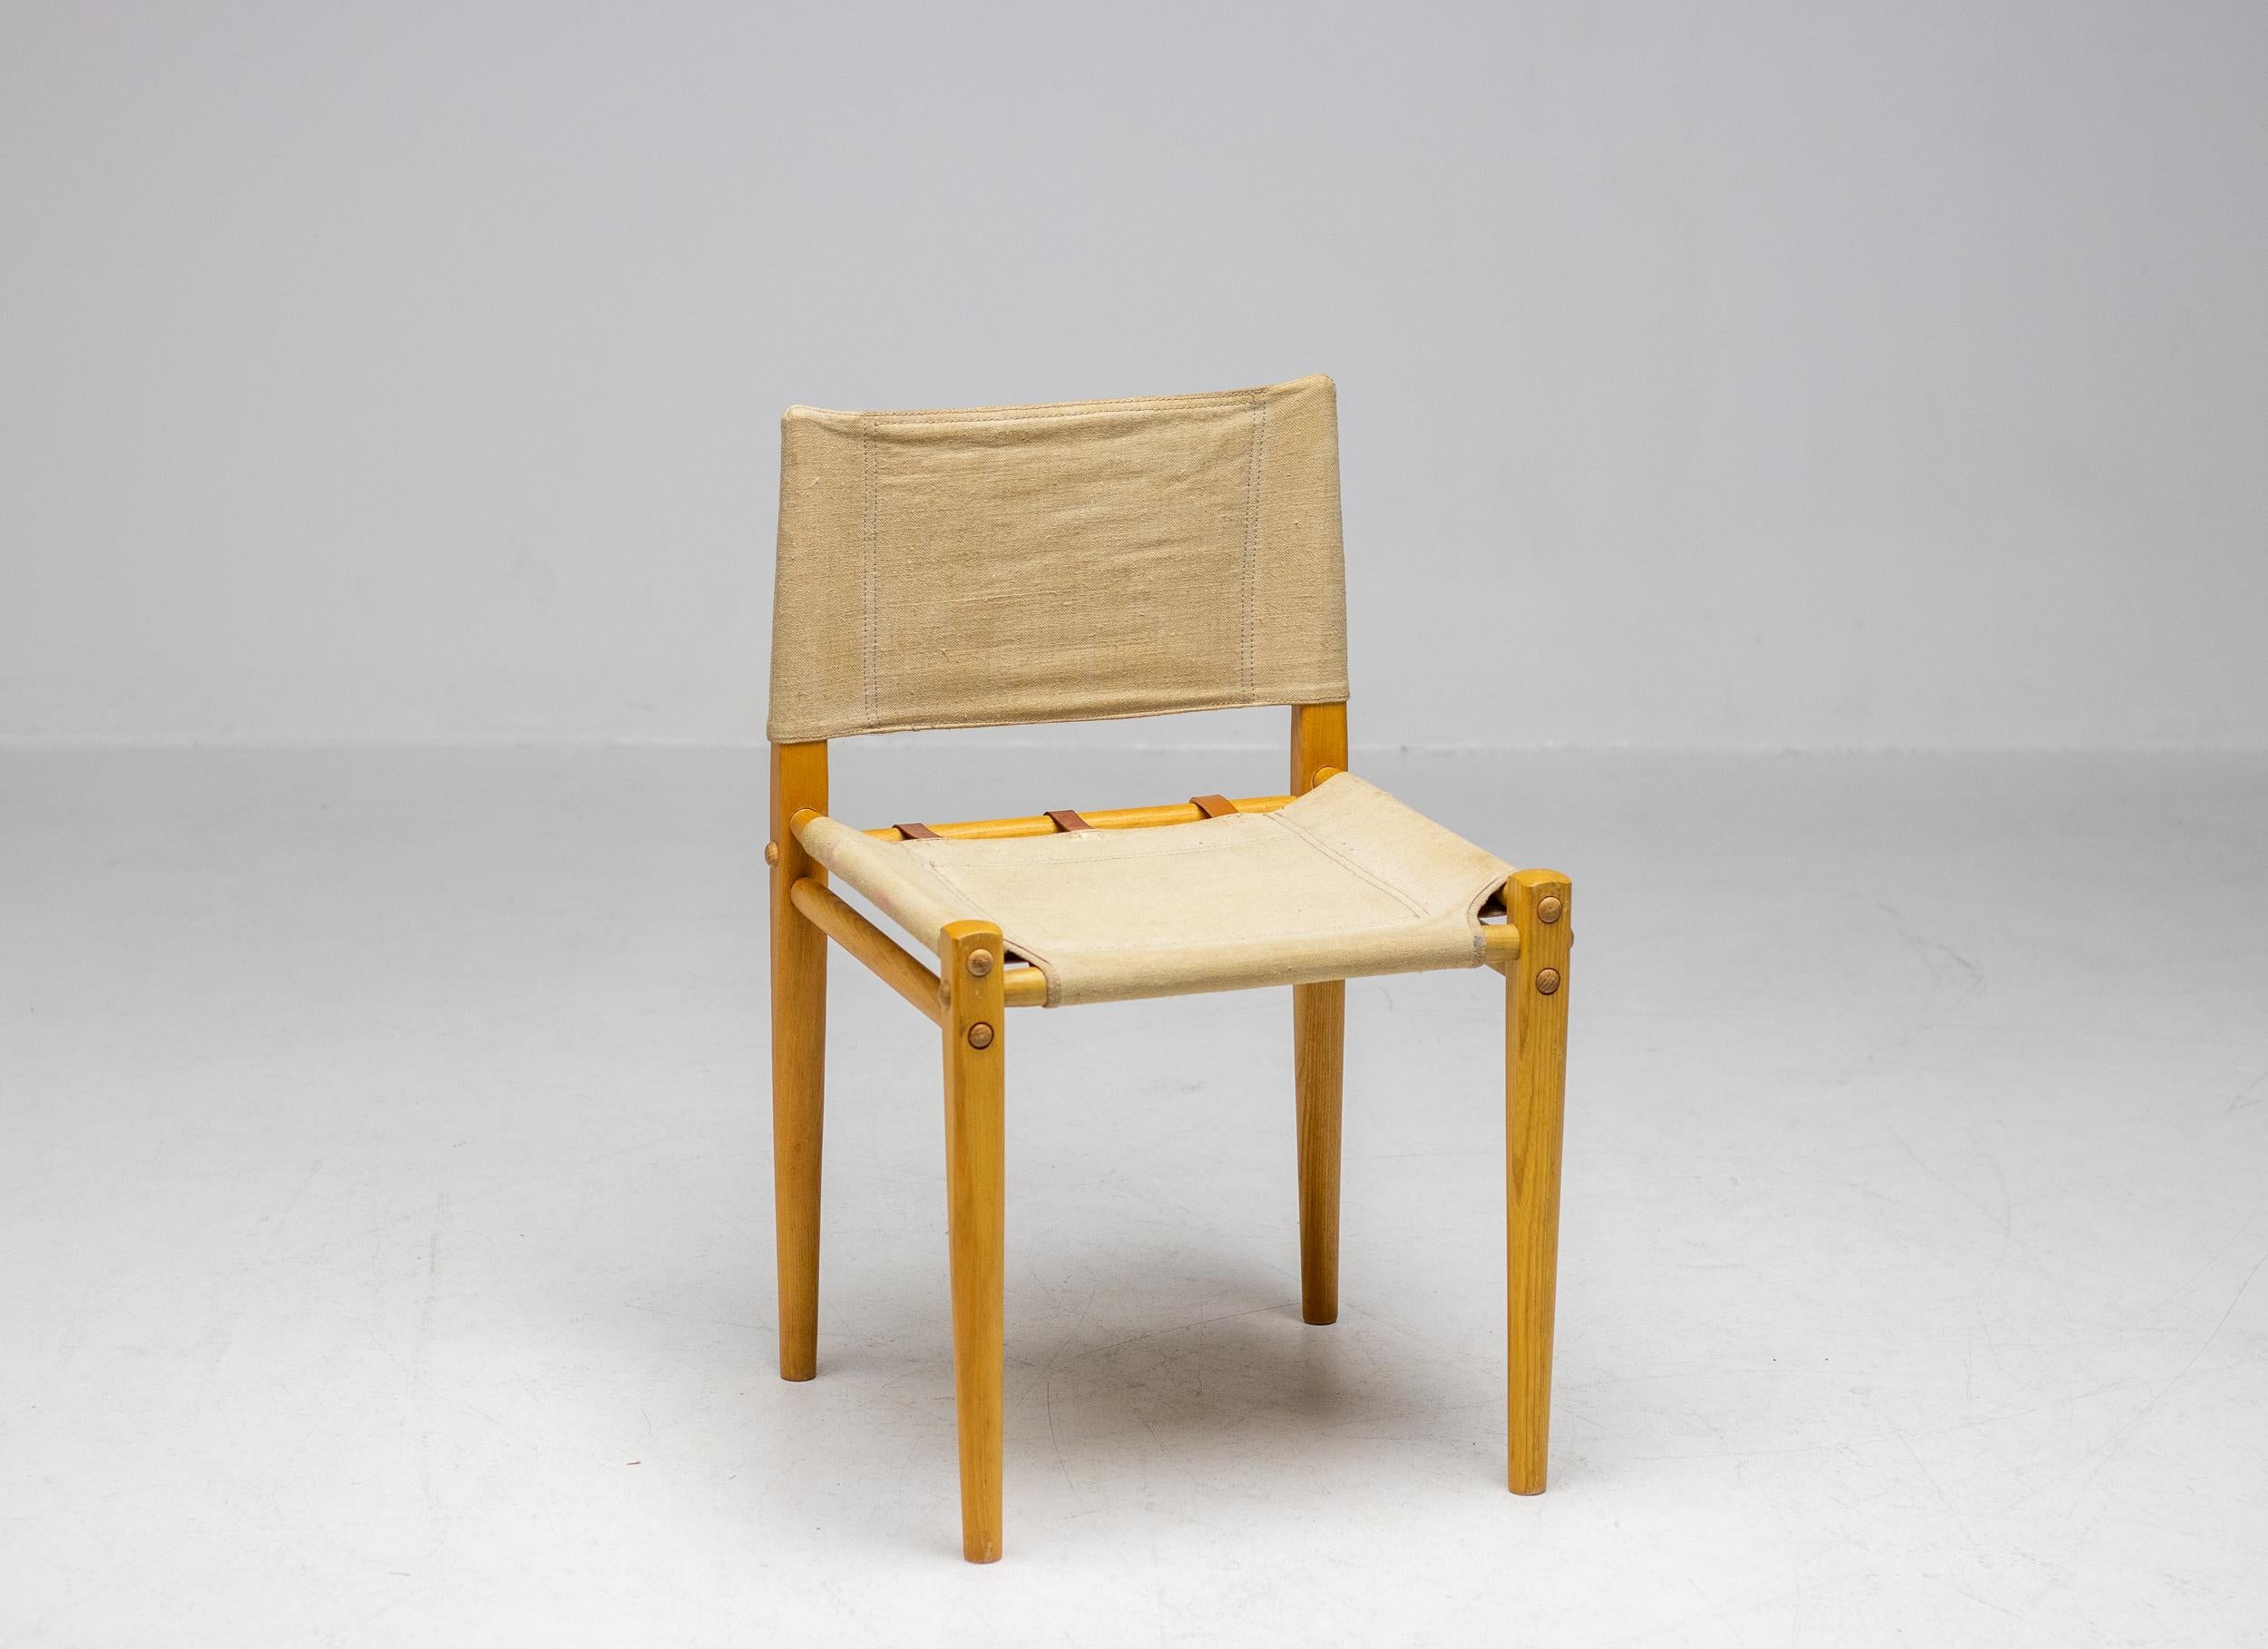 Rare 1970s side chair in ash and canvas made by Zanotta. The chair is very solid but disassembles completely when desired.  In wonderful vintage condition, one of the 3 leather belts in the seat has been replaced as shown in one of the